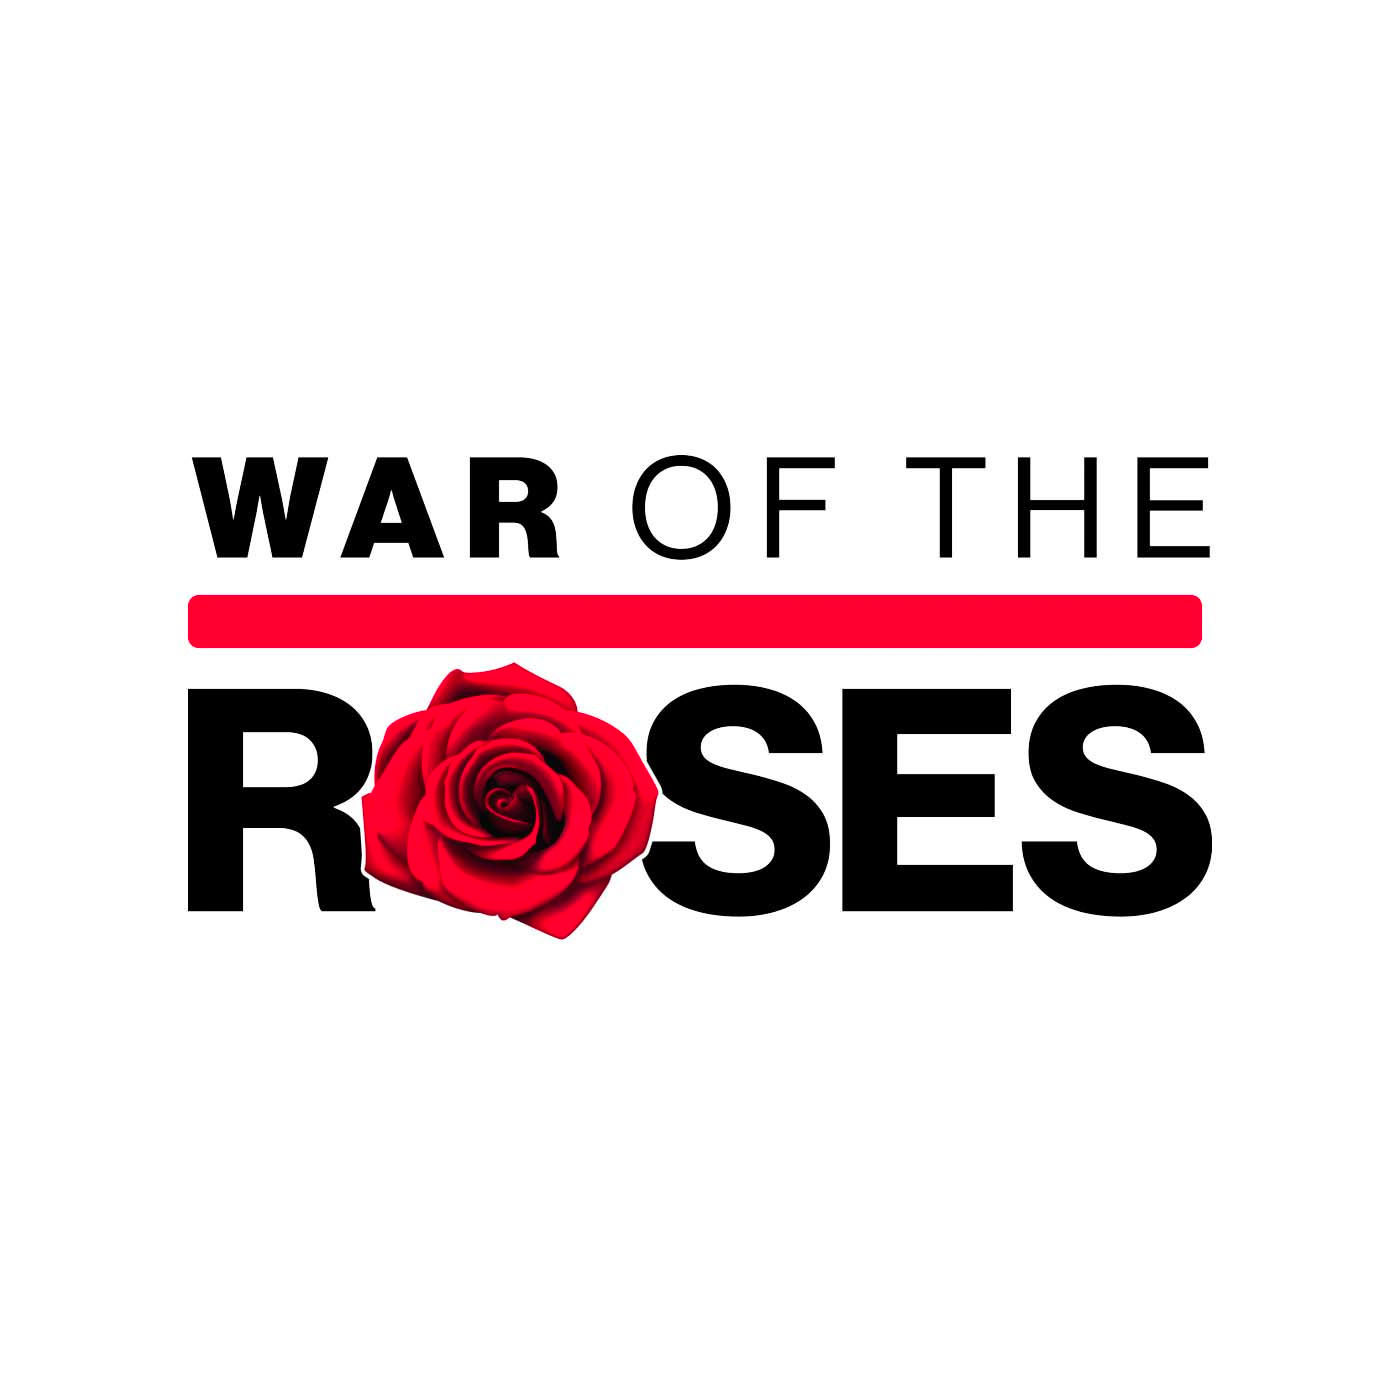 It's always the ex girlfriend | War of the Roses